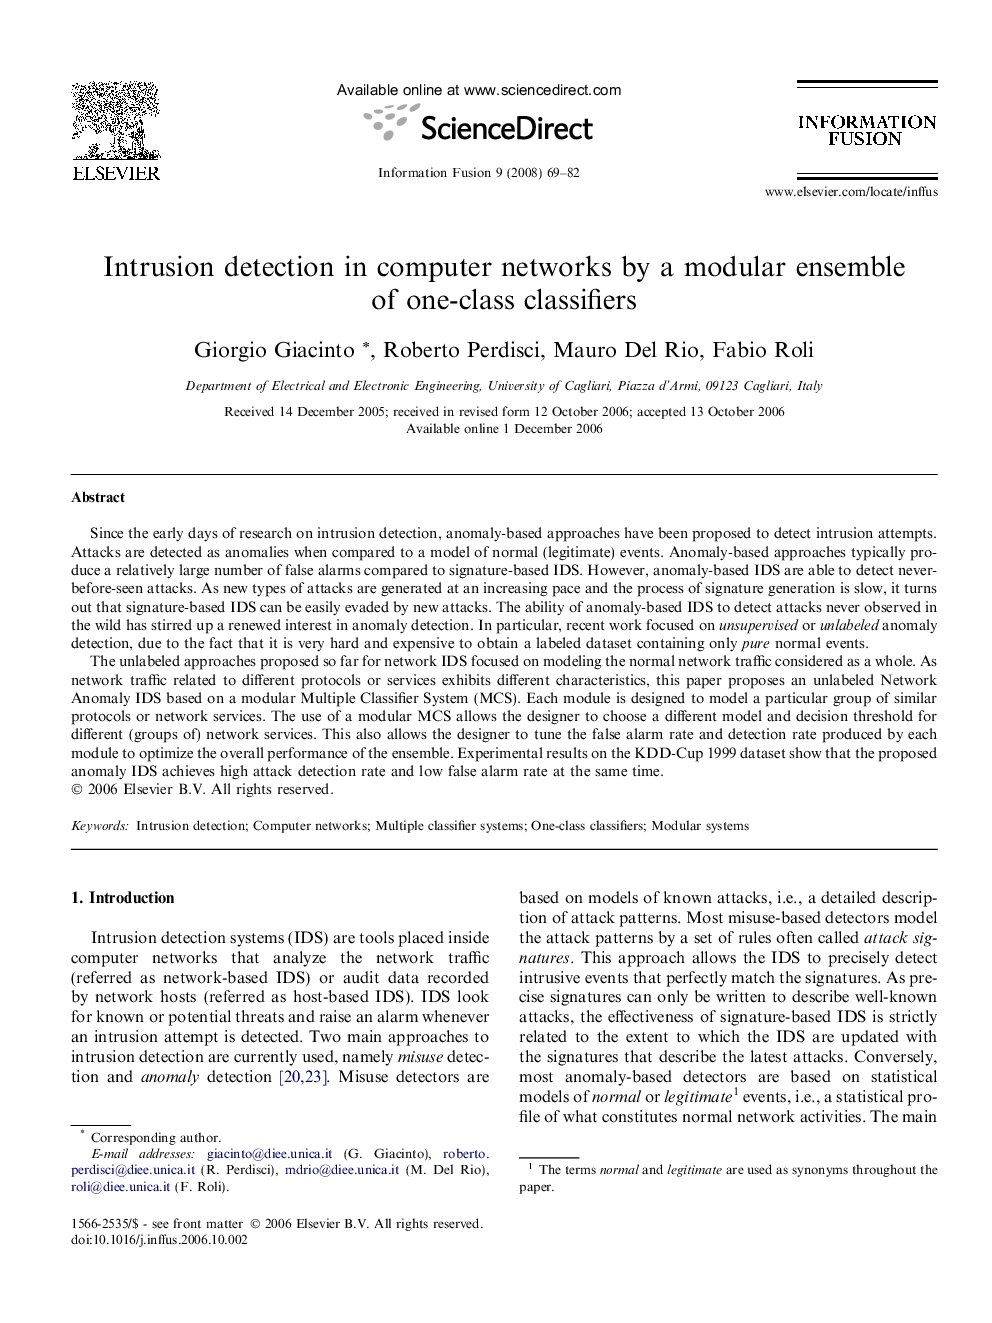 Intrusion detection in computer networks by a modular ensemble of one-class classifiers